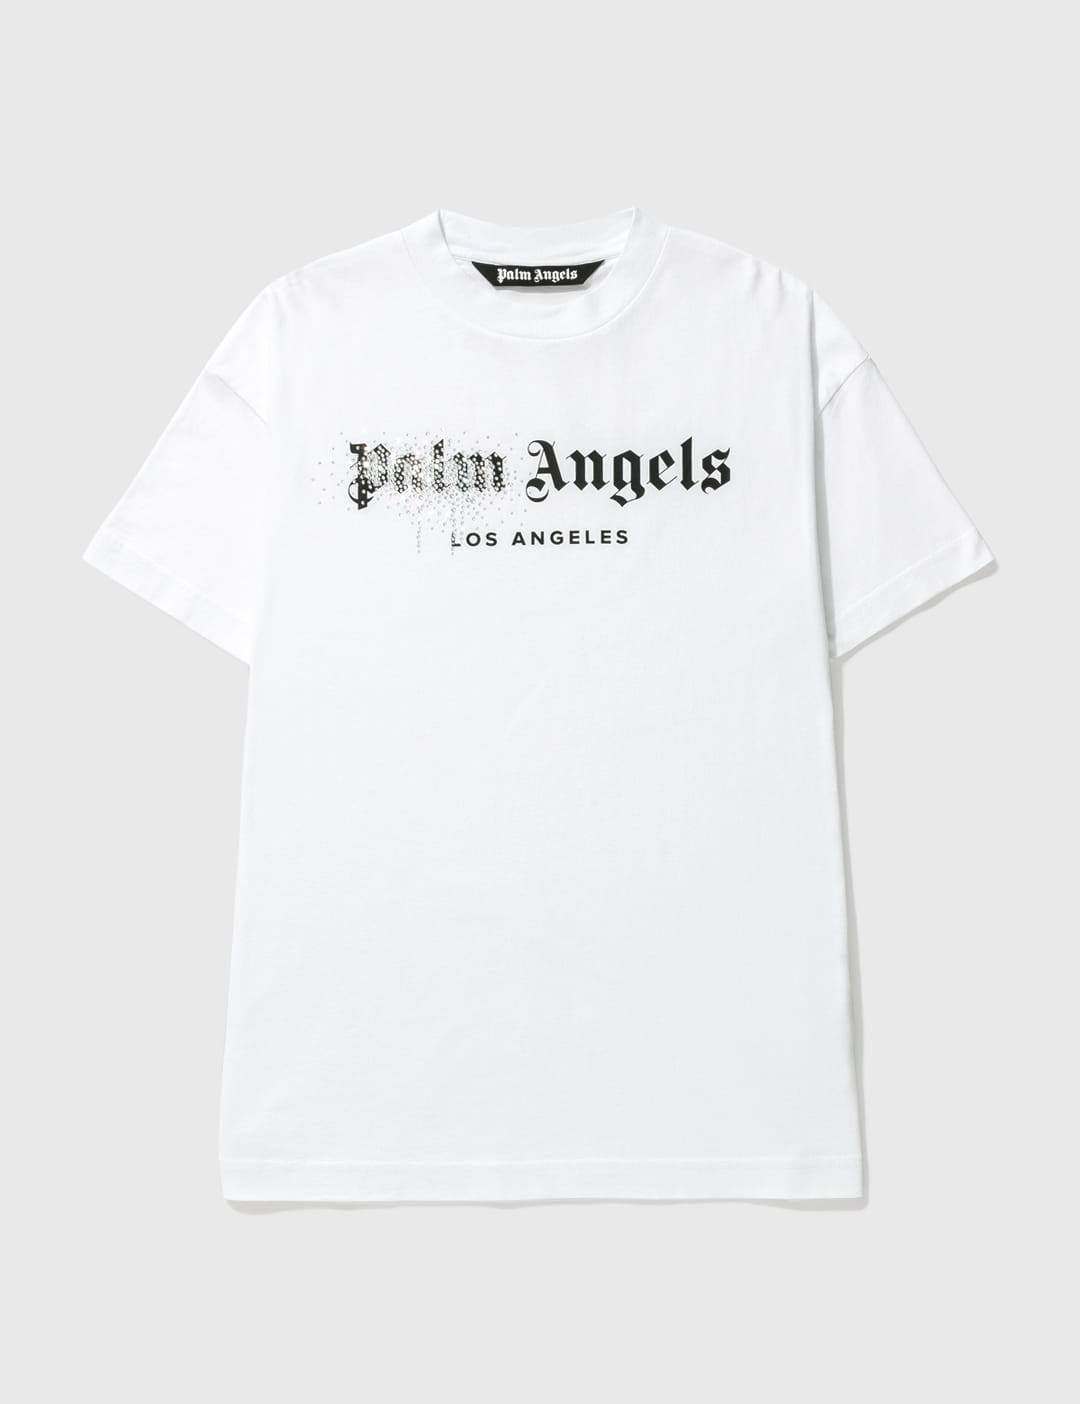 Palm Angels | HBX - Globally Curated Fashion and Lifestyle by 